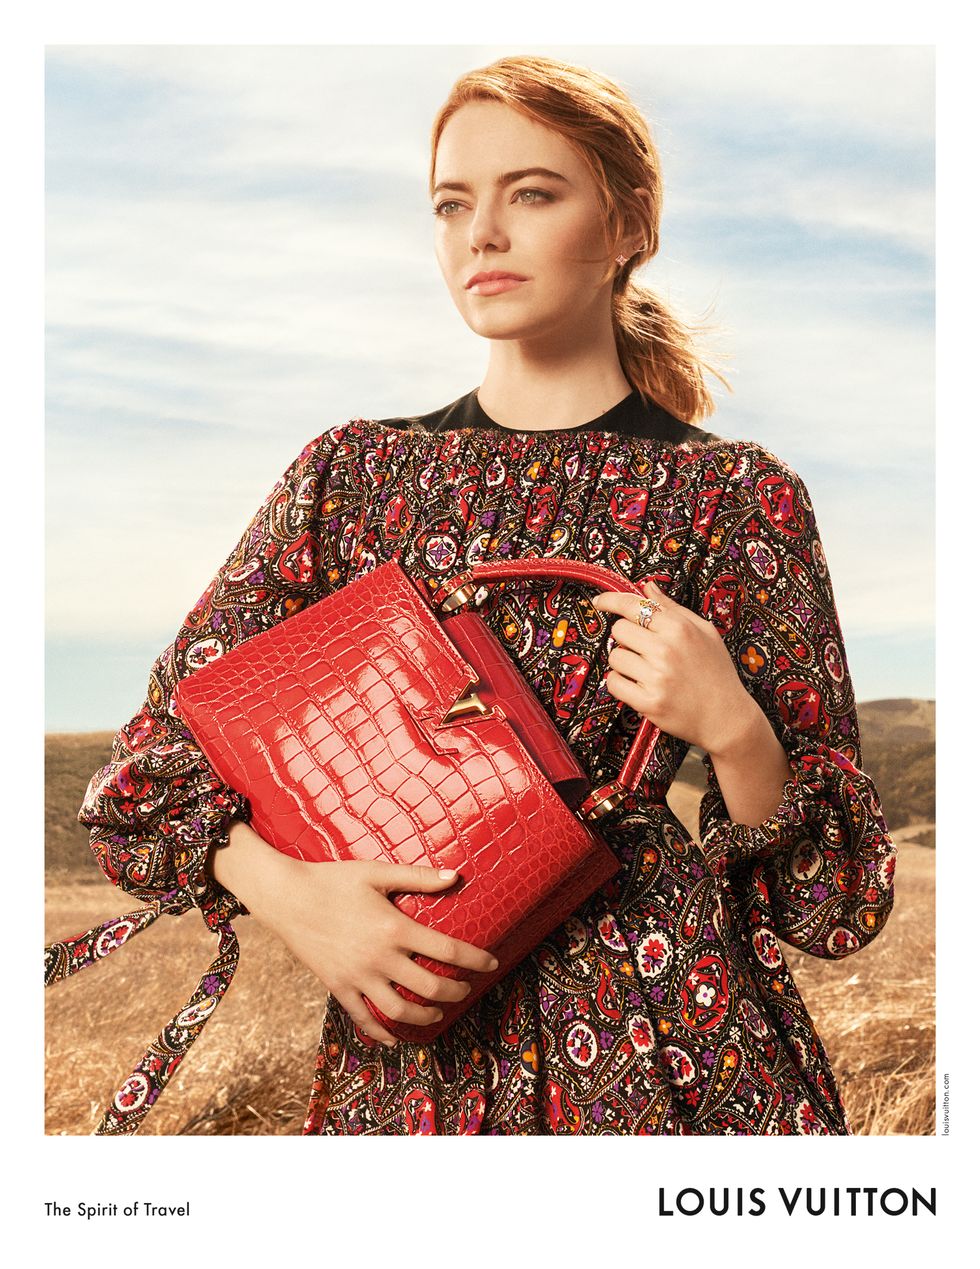 Glass presents Louis Vuitton's Accessories Campaign with Emma